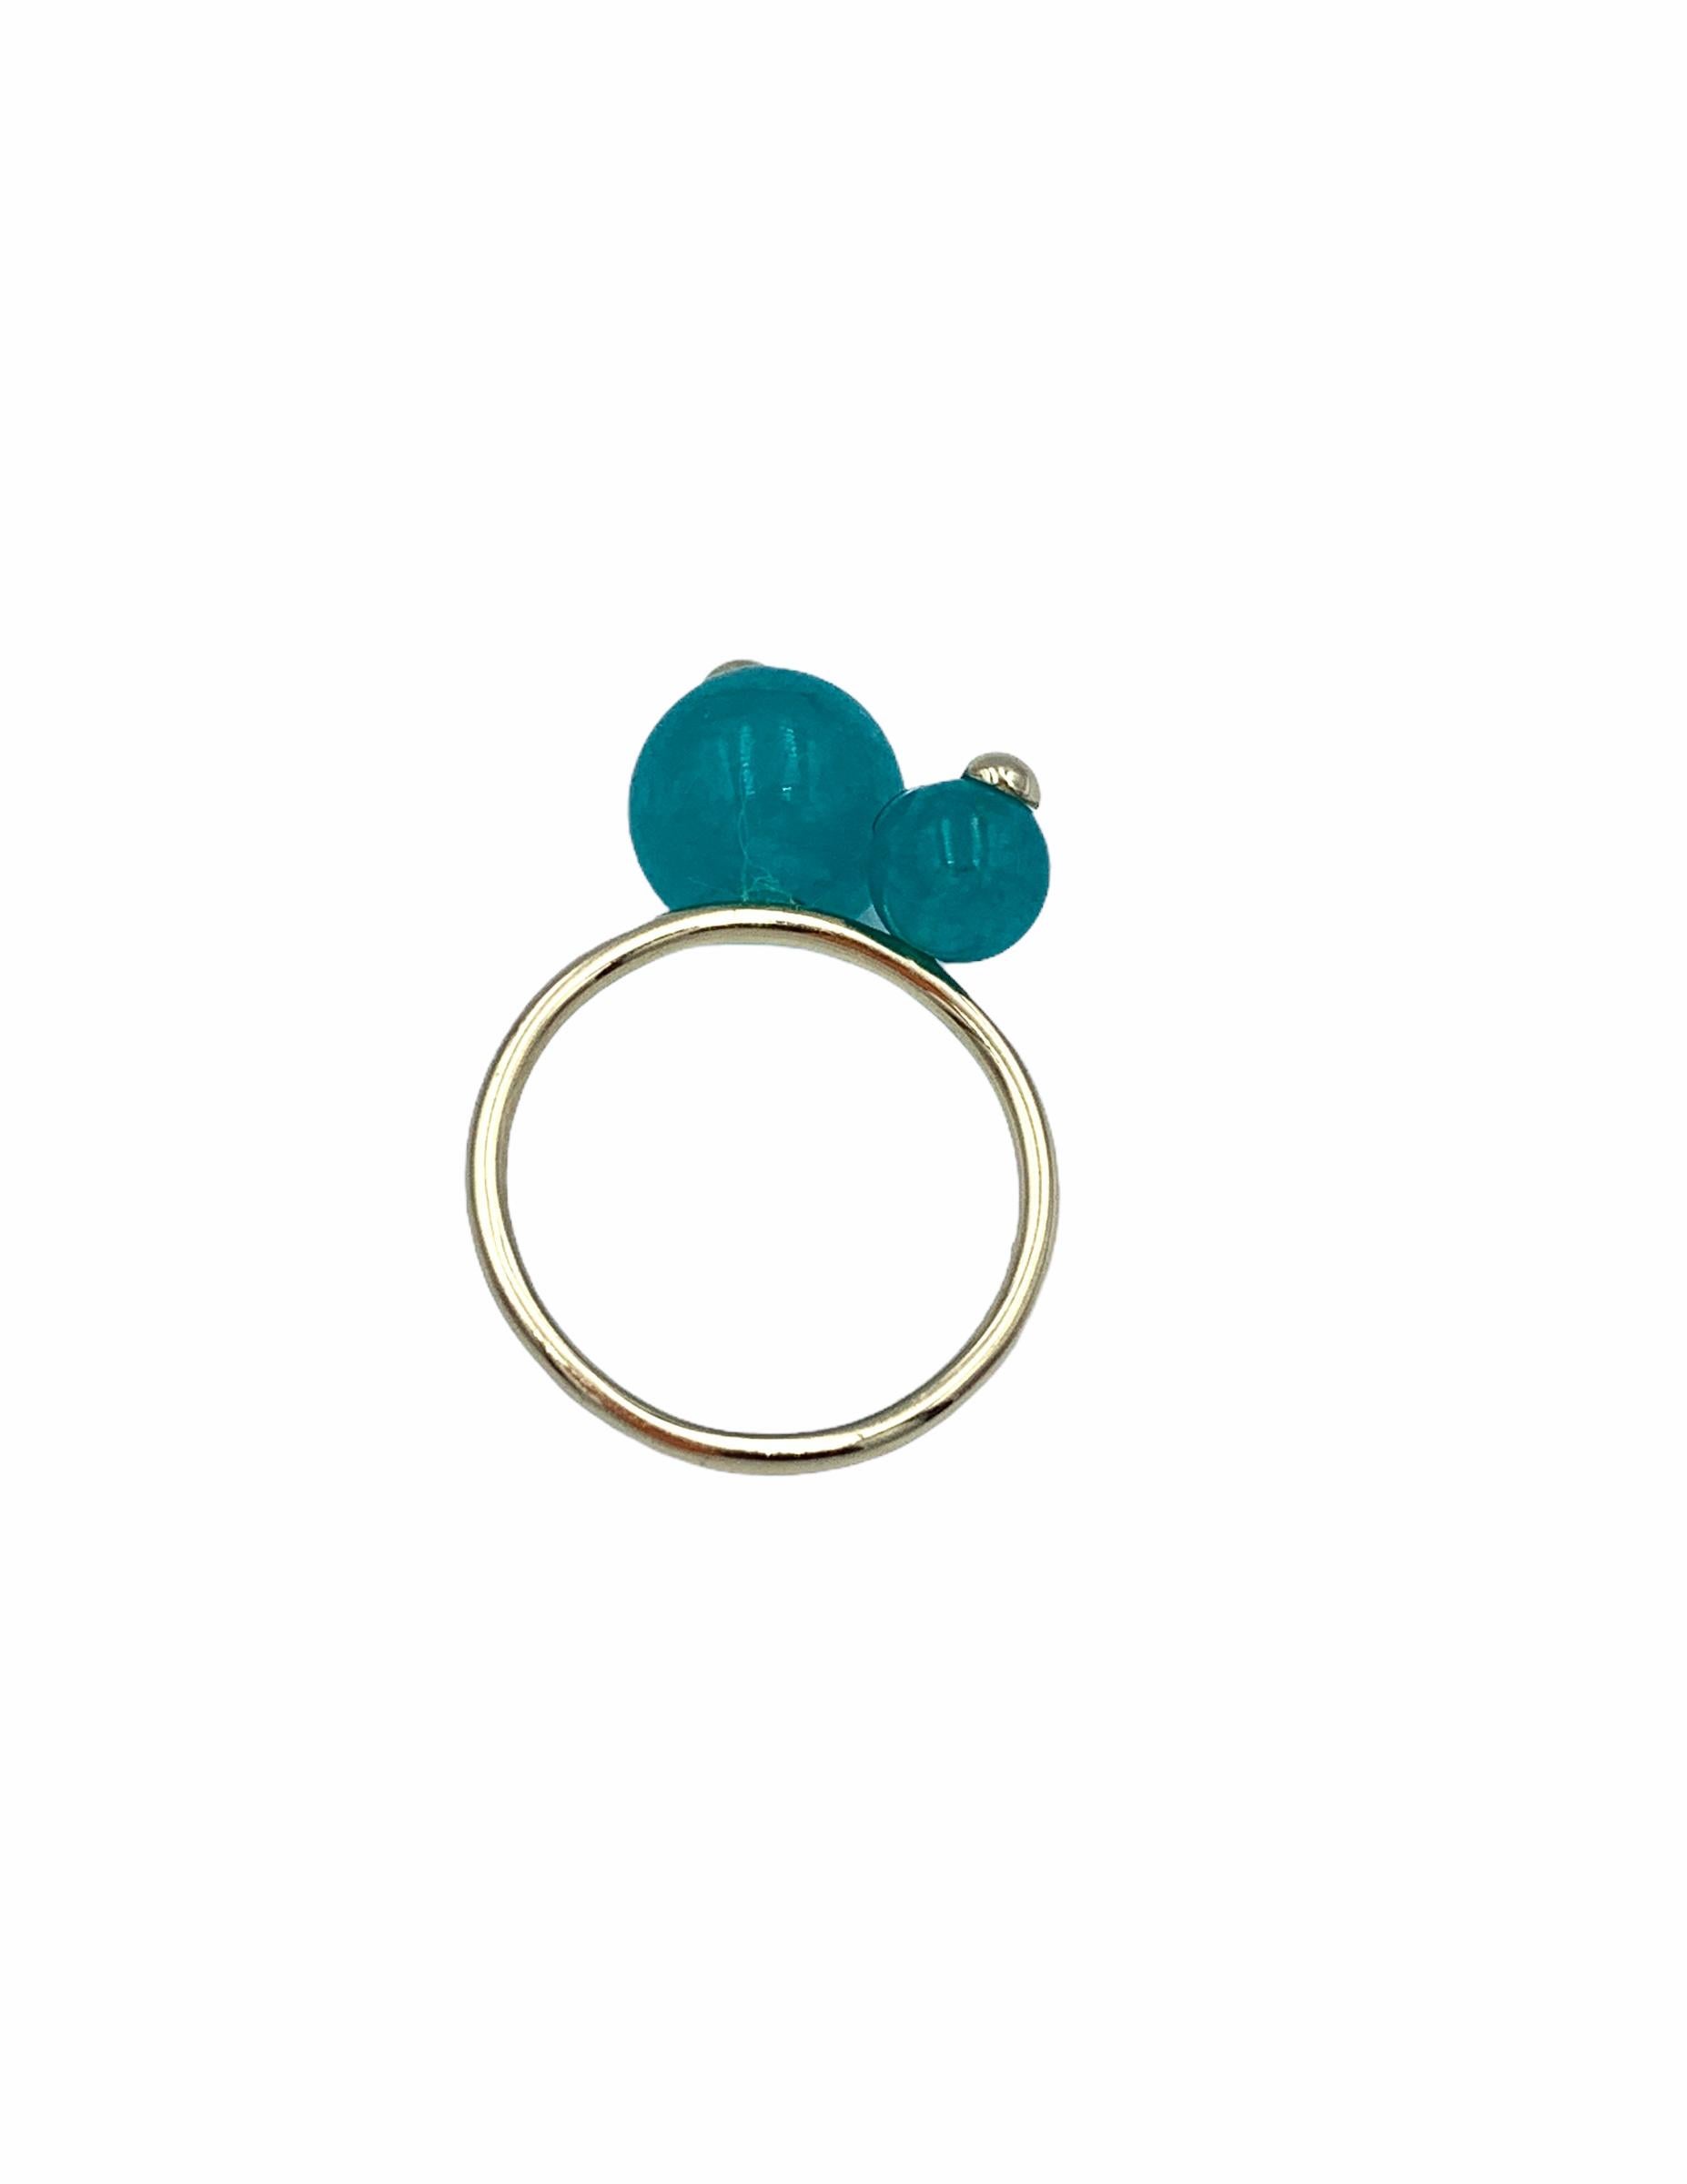 Hand made using 9 carat Yellow Gold, the two sized Chalcedony beads are threaded trough with a solid gold wire and soldered onto a delicate ring. The large teal beads is 10 mm, the following next to it is 6 mm, they both have a little yellow gold